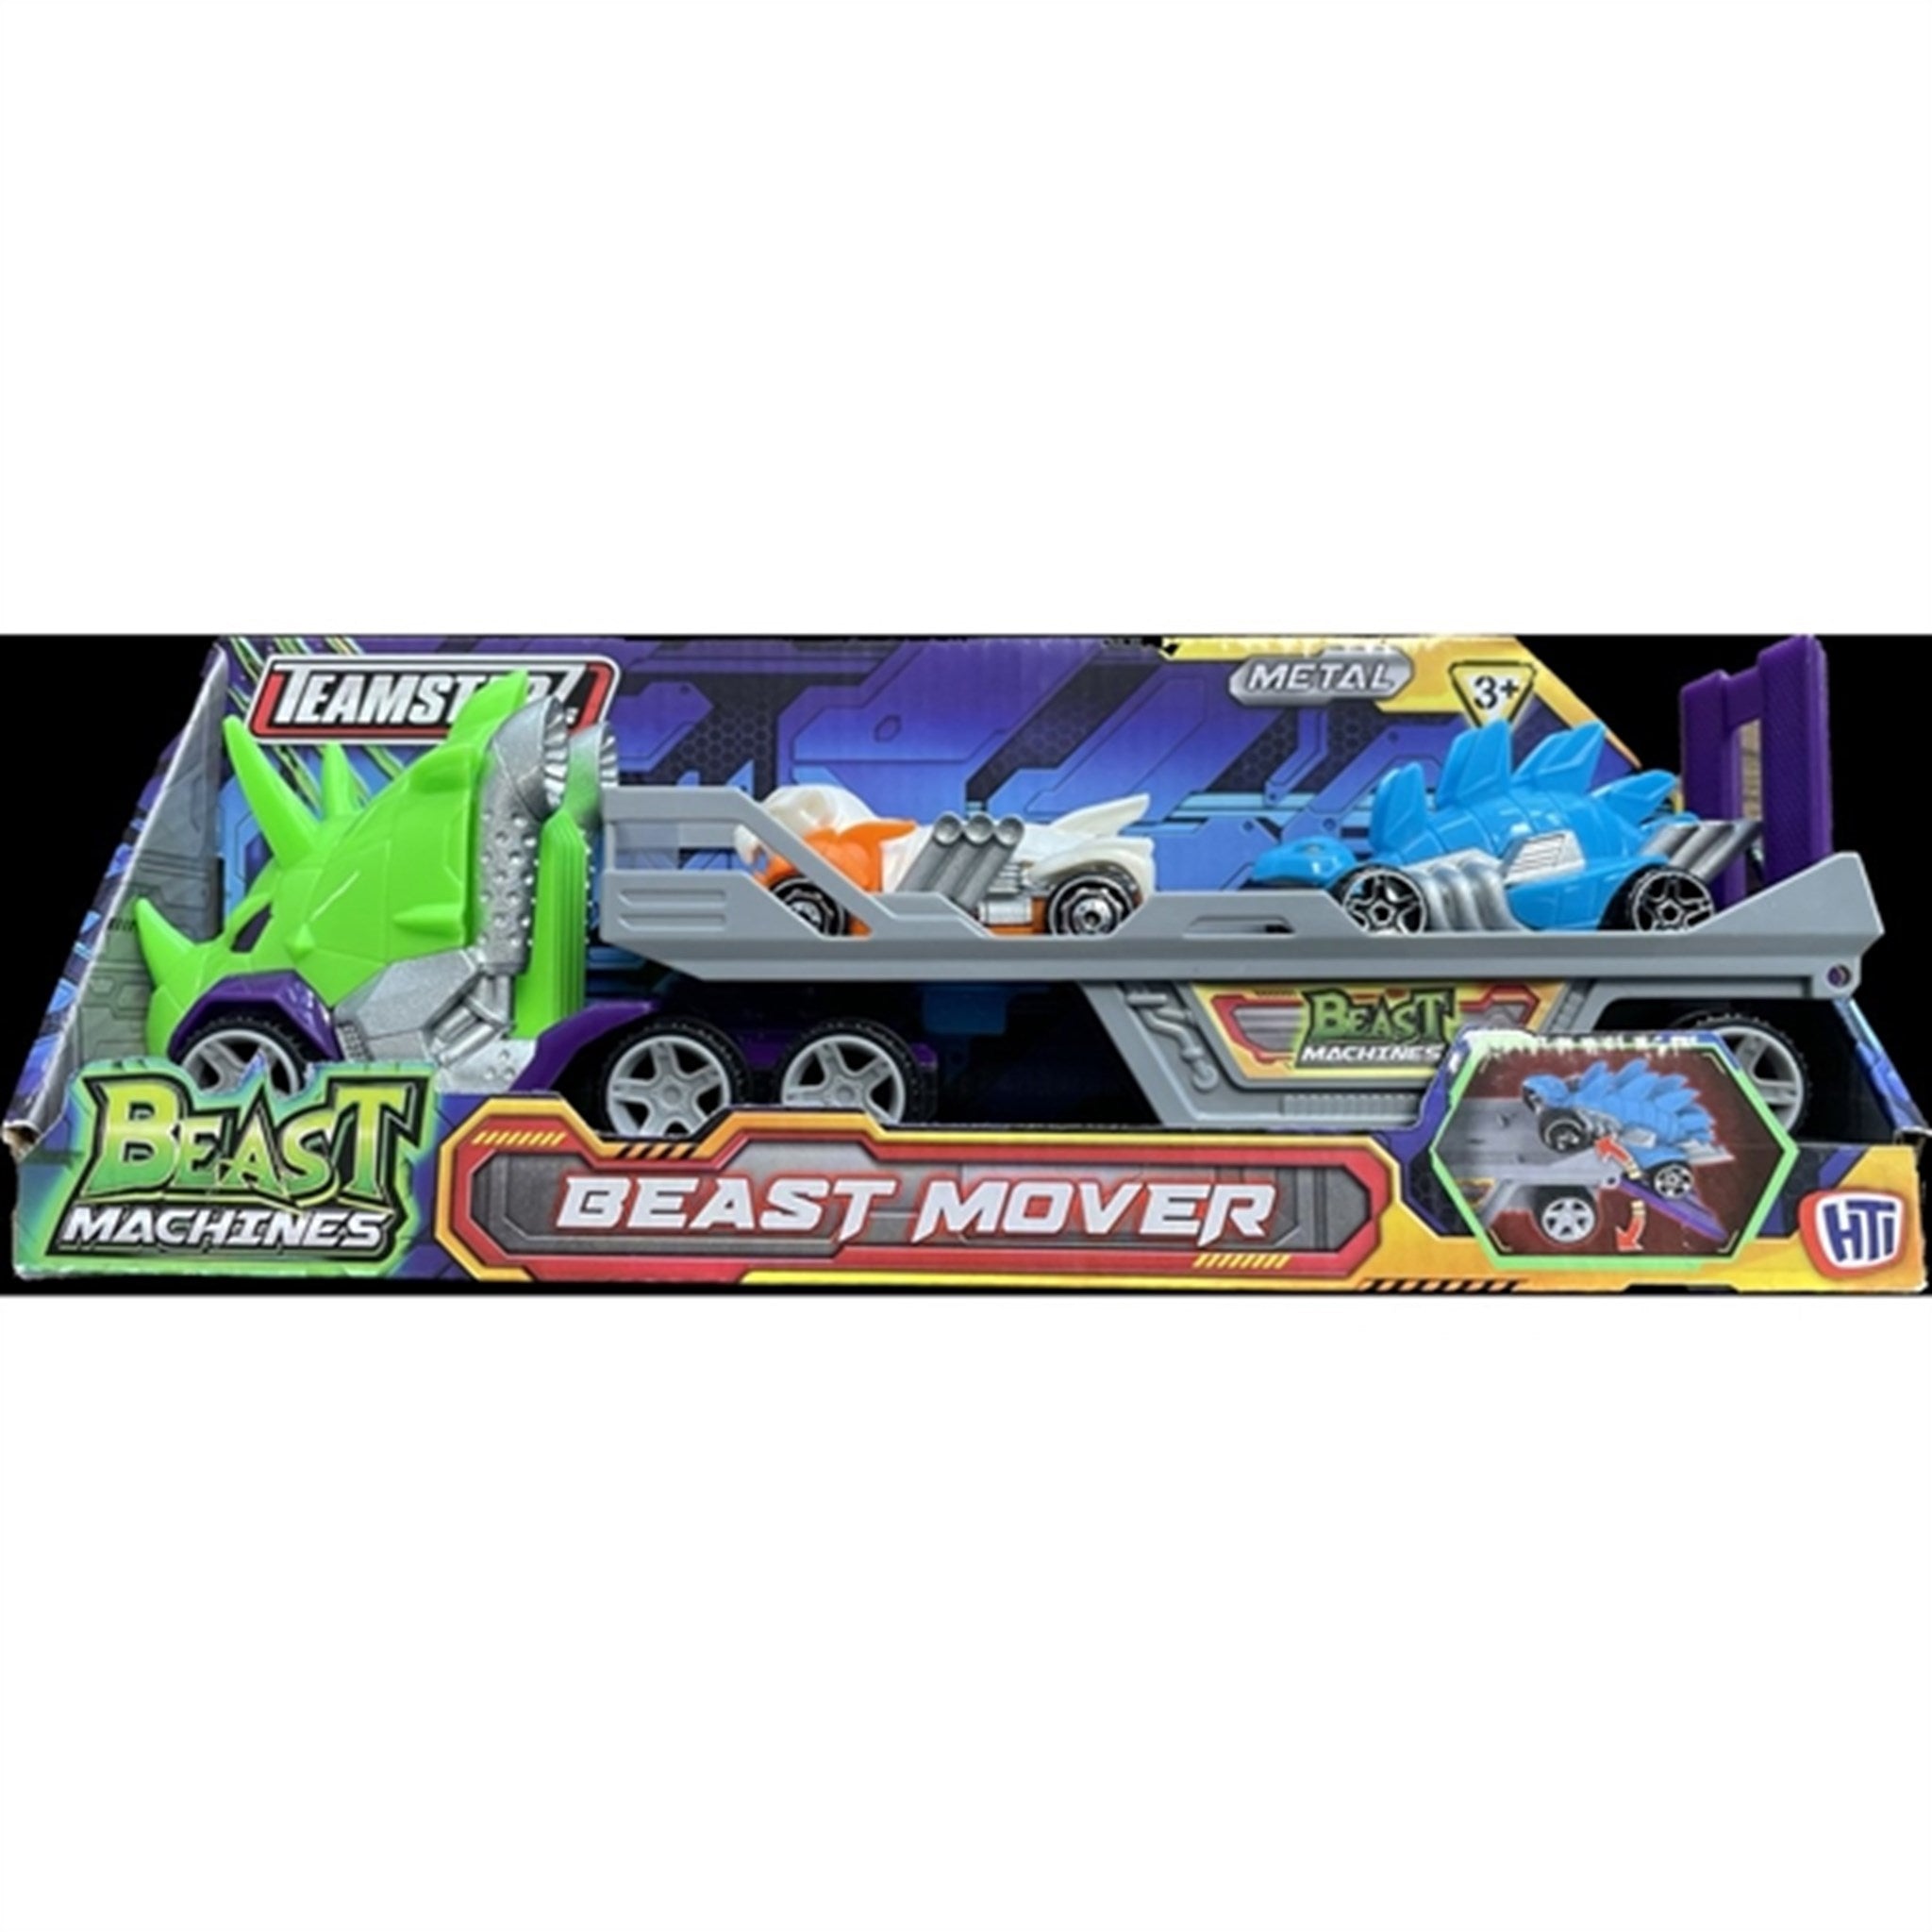 Teamsterz Beast Machine Beast Mover with 2 Cars